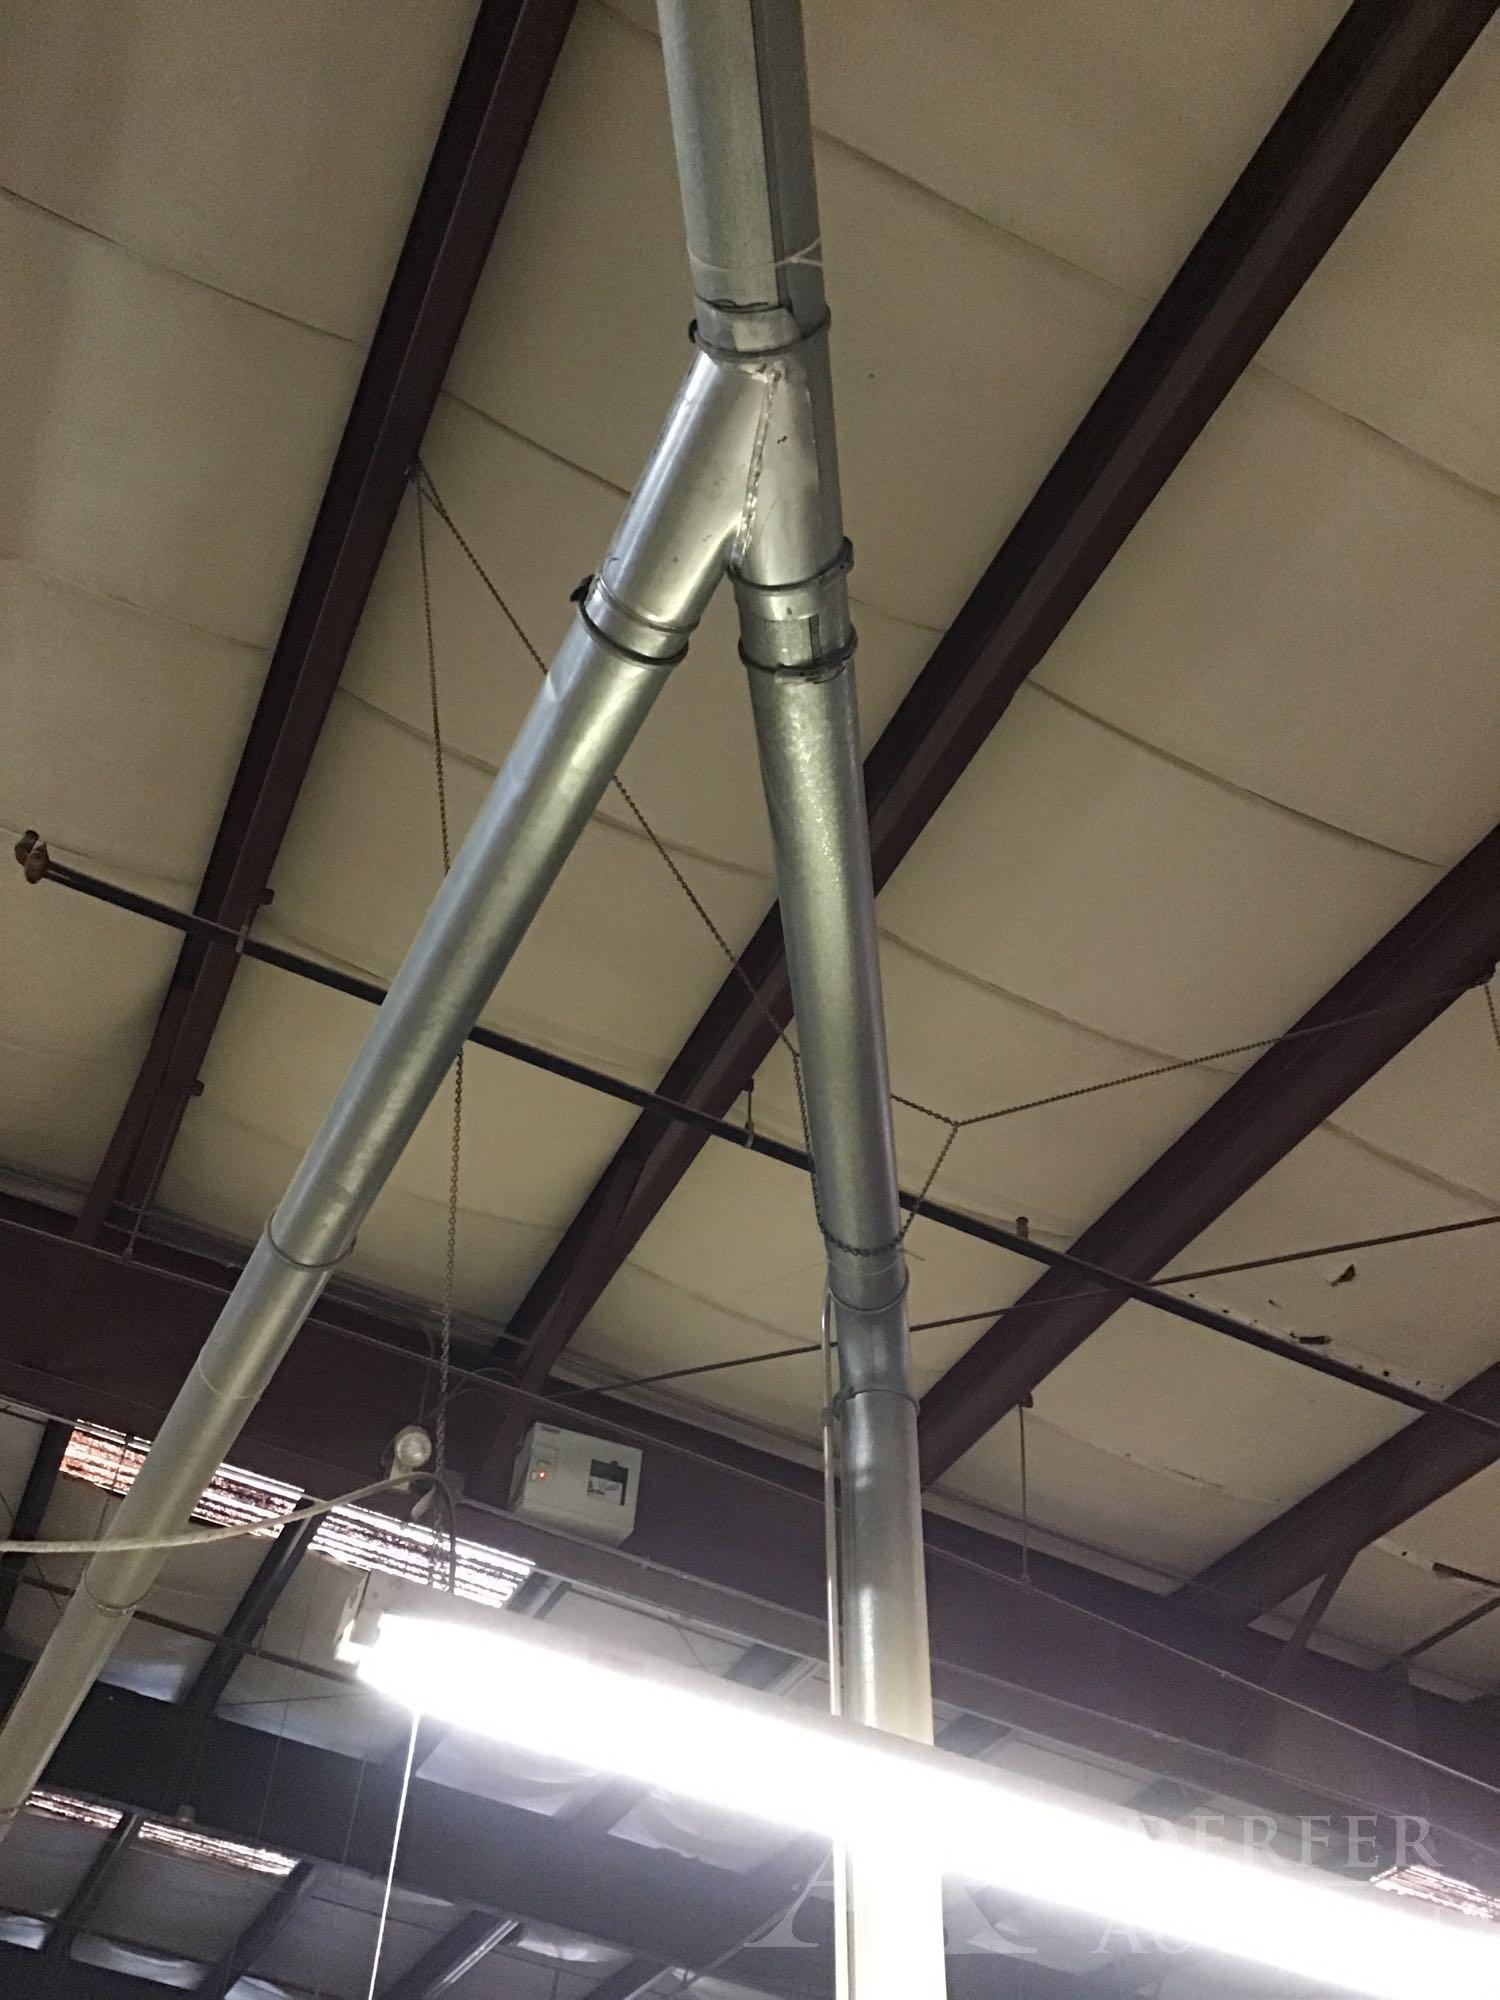 Nordfab Dustek Industrial Quick Connect Dust Collection Ducting System